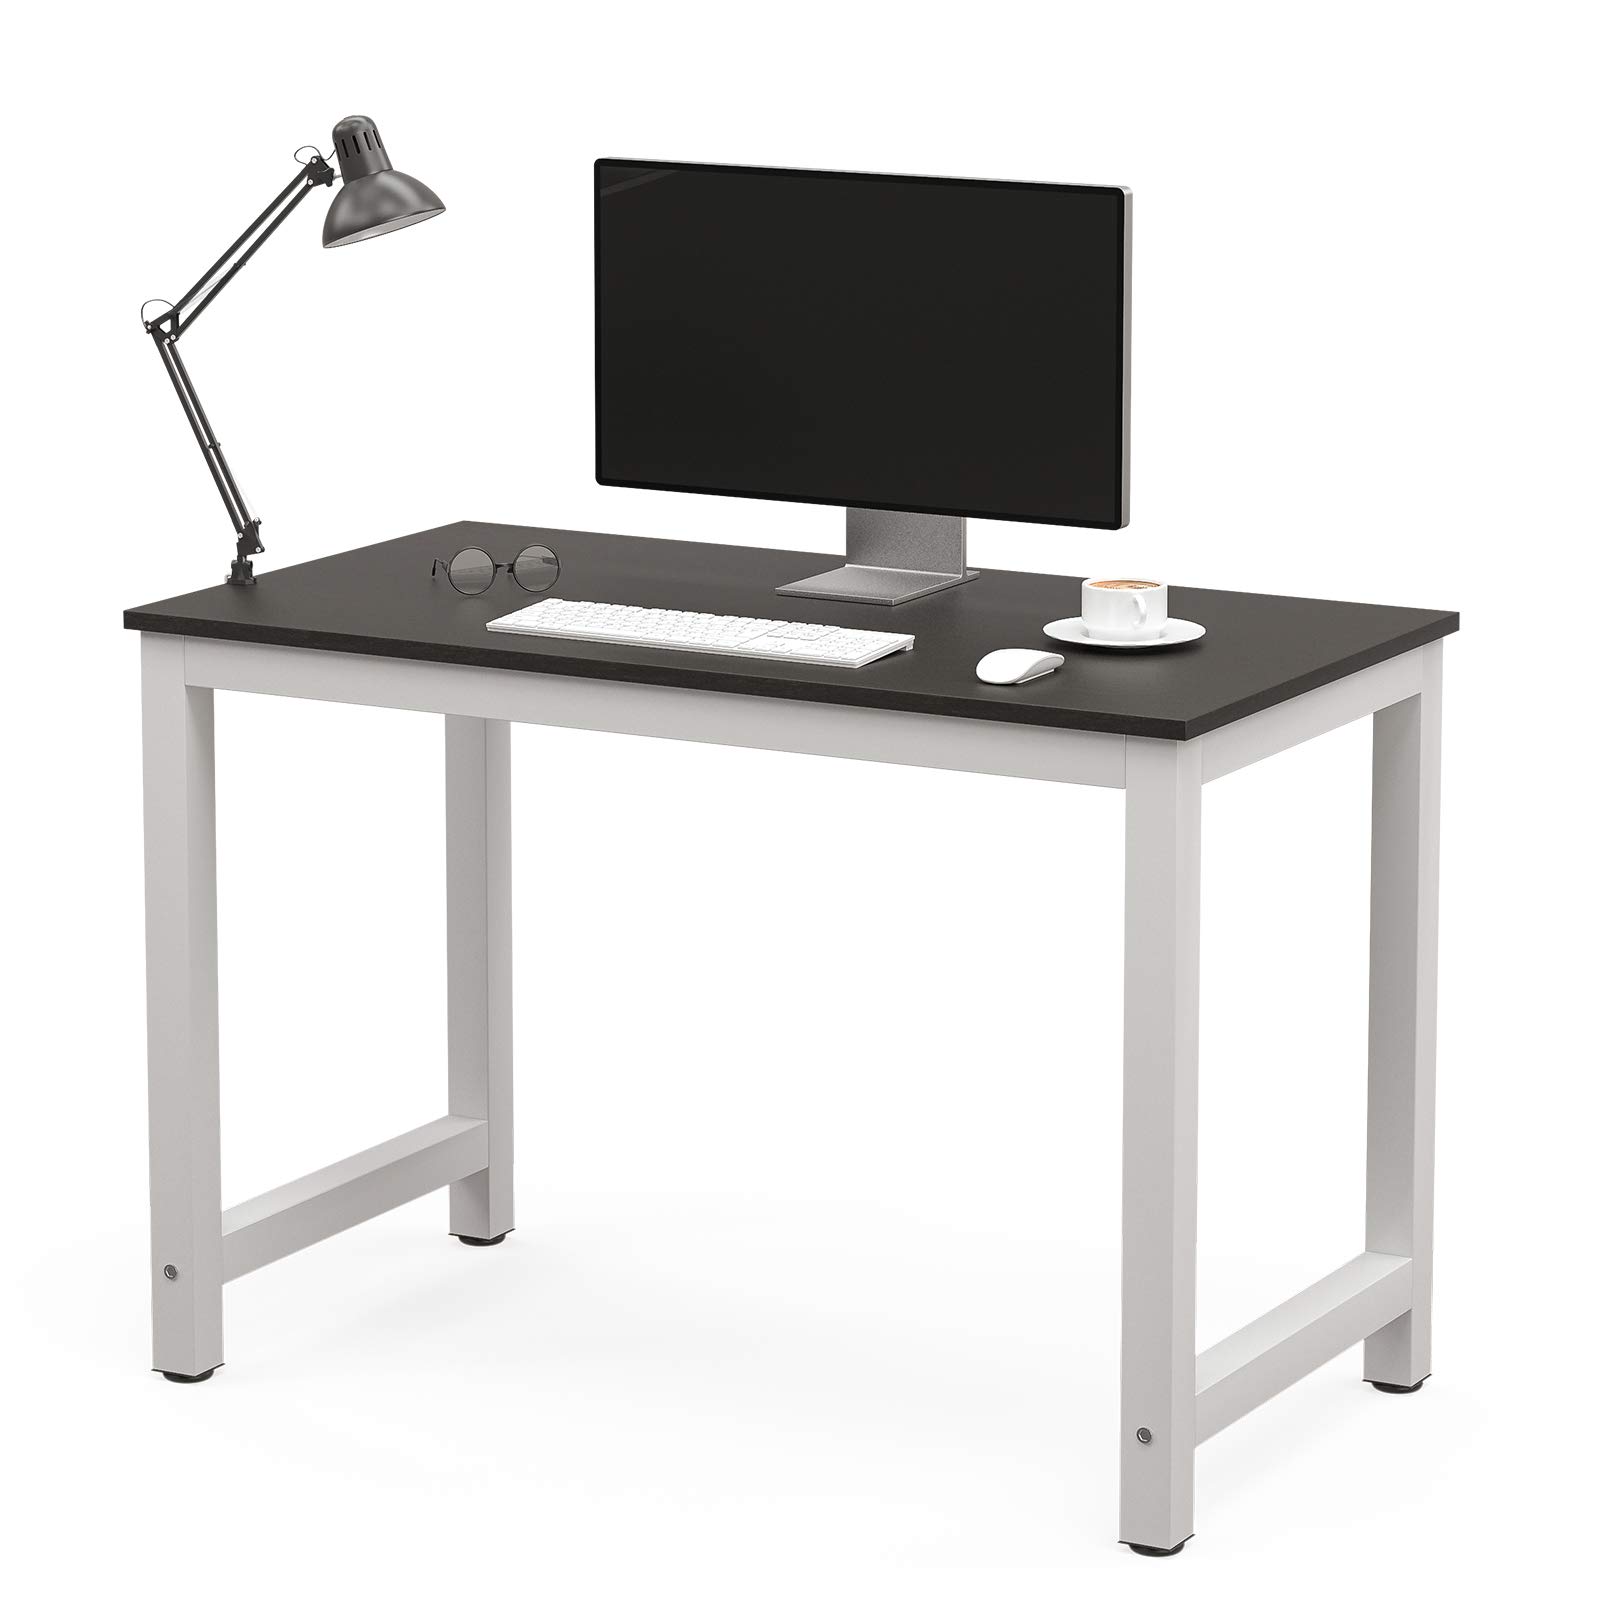 Mecor 43”Large MDF Computer Office Desk PC Laptop Table Study Work-Station Home Office Furniture Black